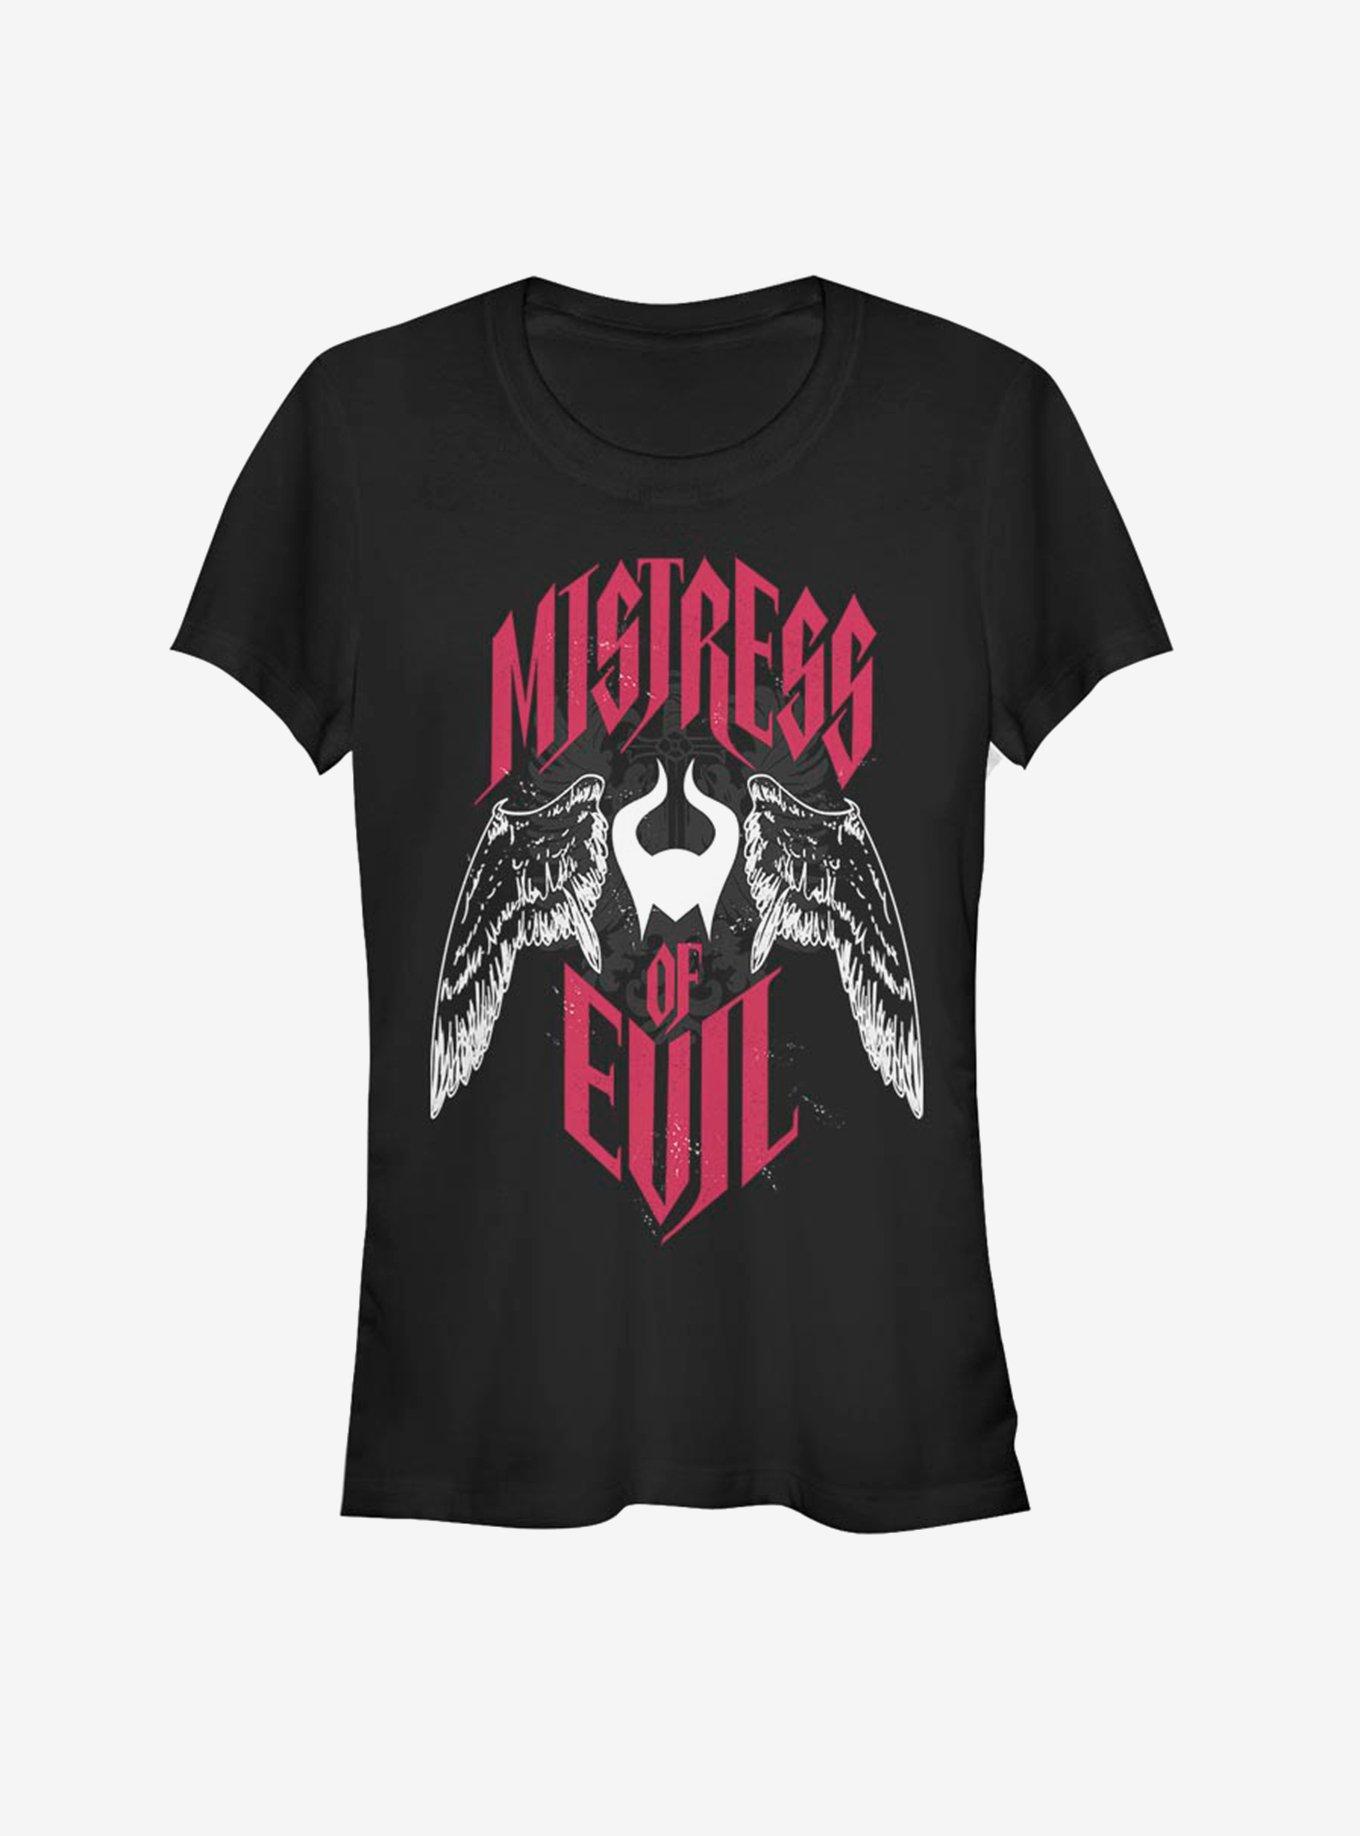 Disney Maleficent: Mistress of Evil With Wings Girls T-Shirt